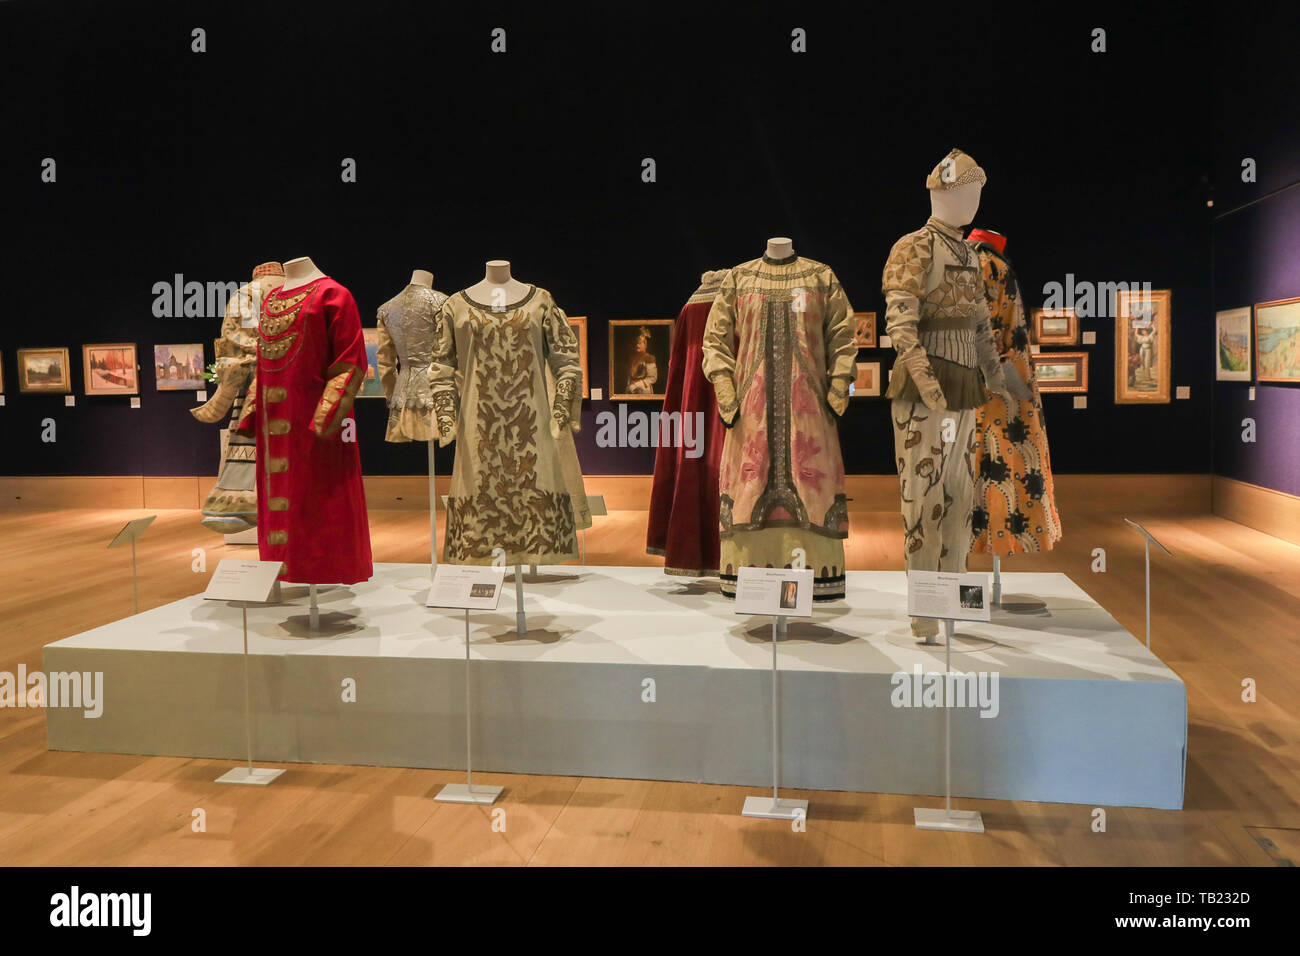 London, UK. 29th May, 2019. In Pursuit of the Firebird  Ballets Russes special Exhibition  marking the 110th anniversary of the Ballets Russes founded by Serge Diaghilev in 1909 Running during Russian Art Week. The exhibition will focus on Costumes used in The Firebird, a ballet by Igor Stravinski presented during the Ballets Russes Paris season in 1910 with music by Igor Stravinsky and the first of his many important collaborations with Diaghilev Credit: amer ghazzal/Alamy Live News Stock Photo